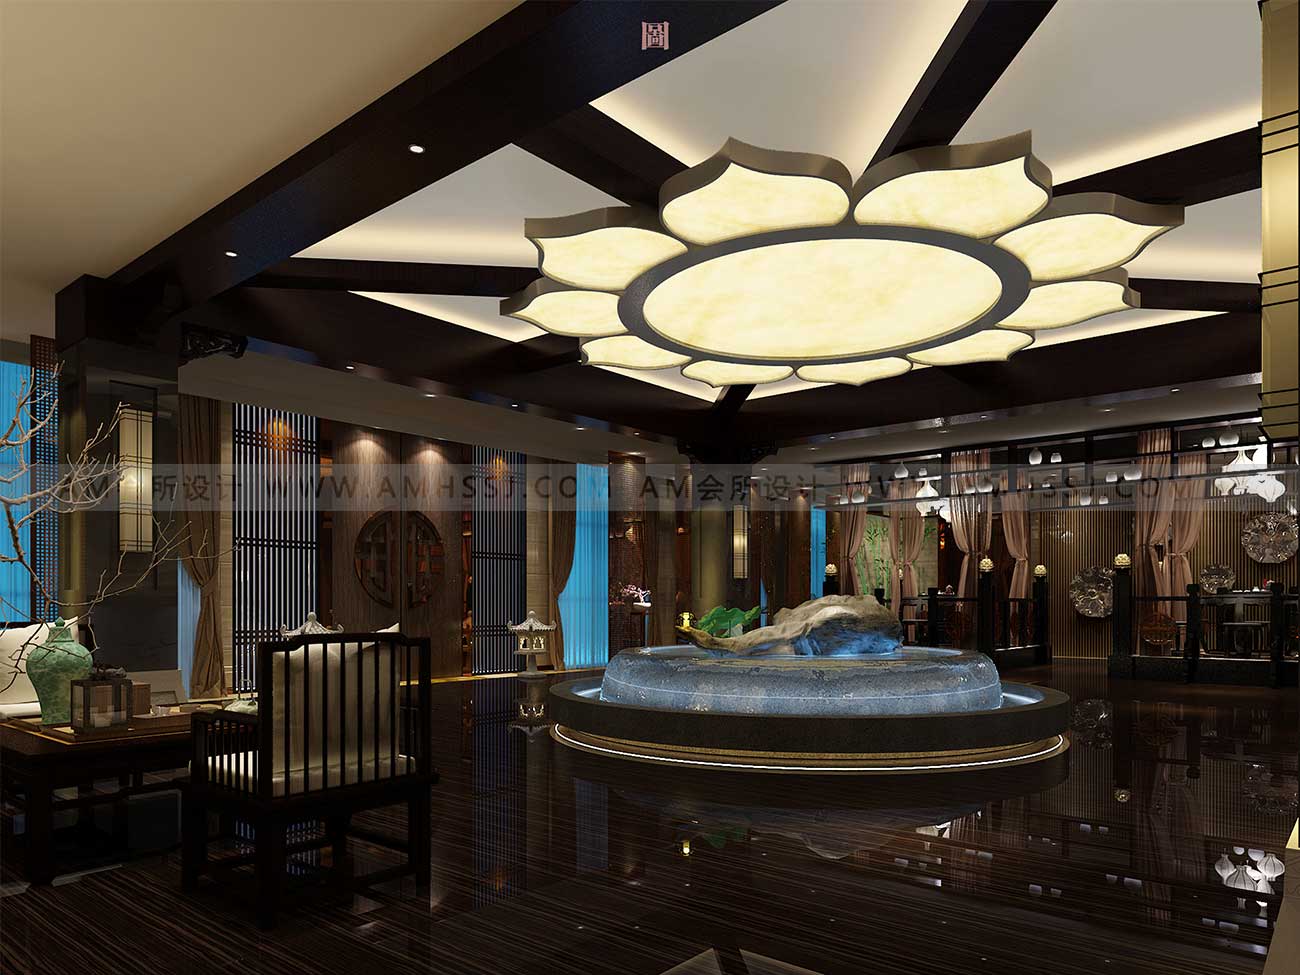 AM DESIGN | Hall design of spa club on Songyu South Road